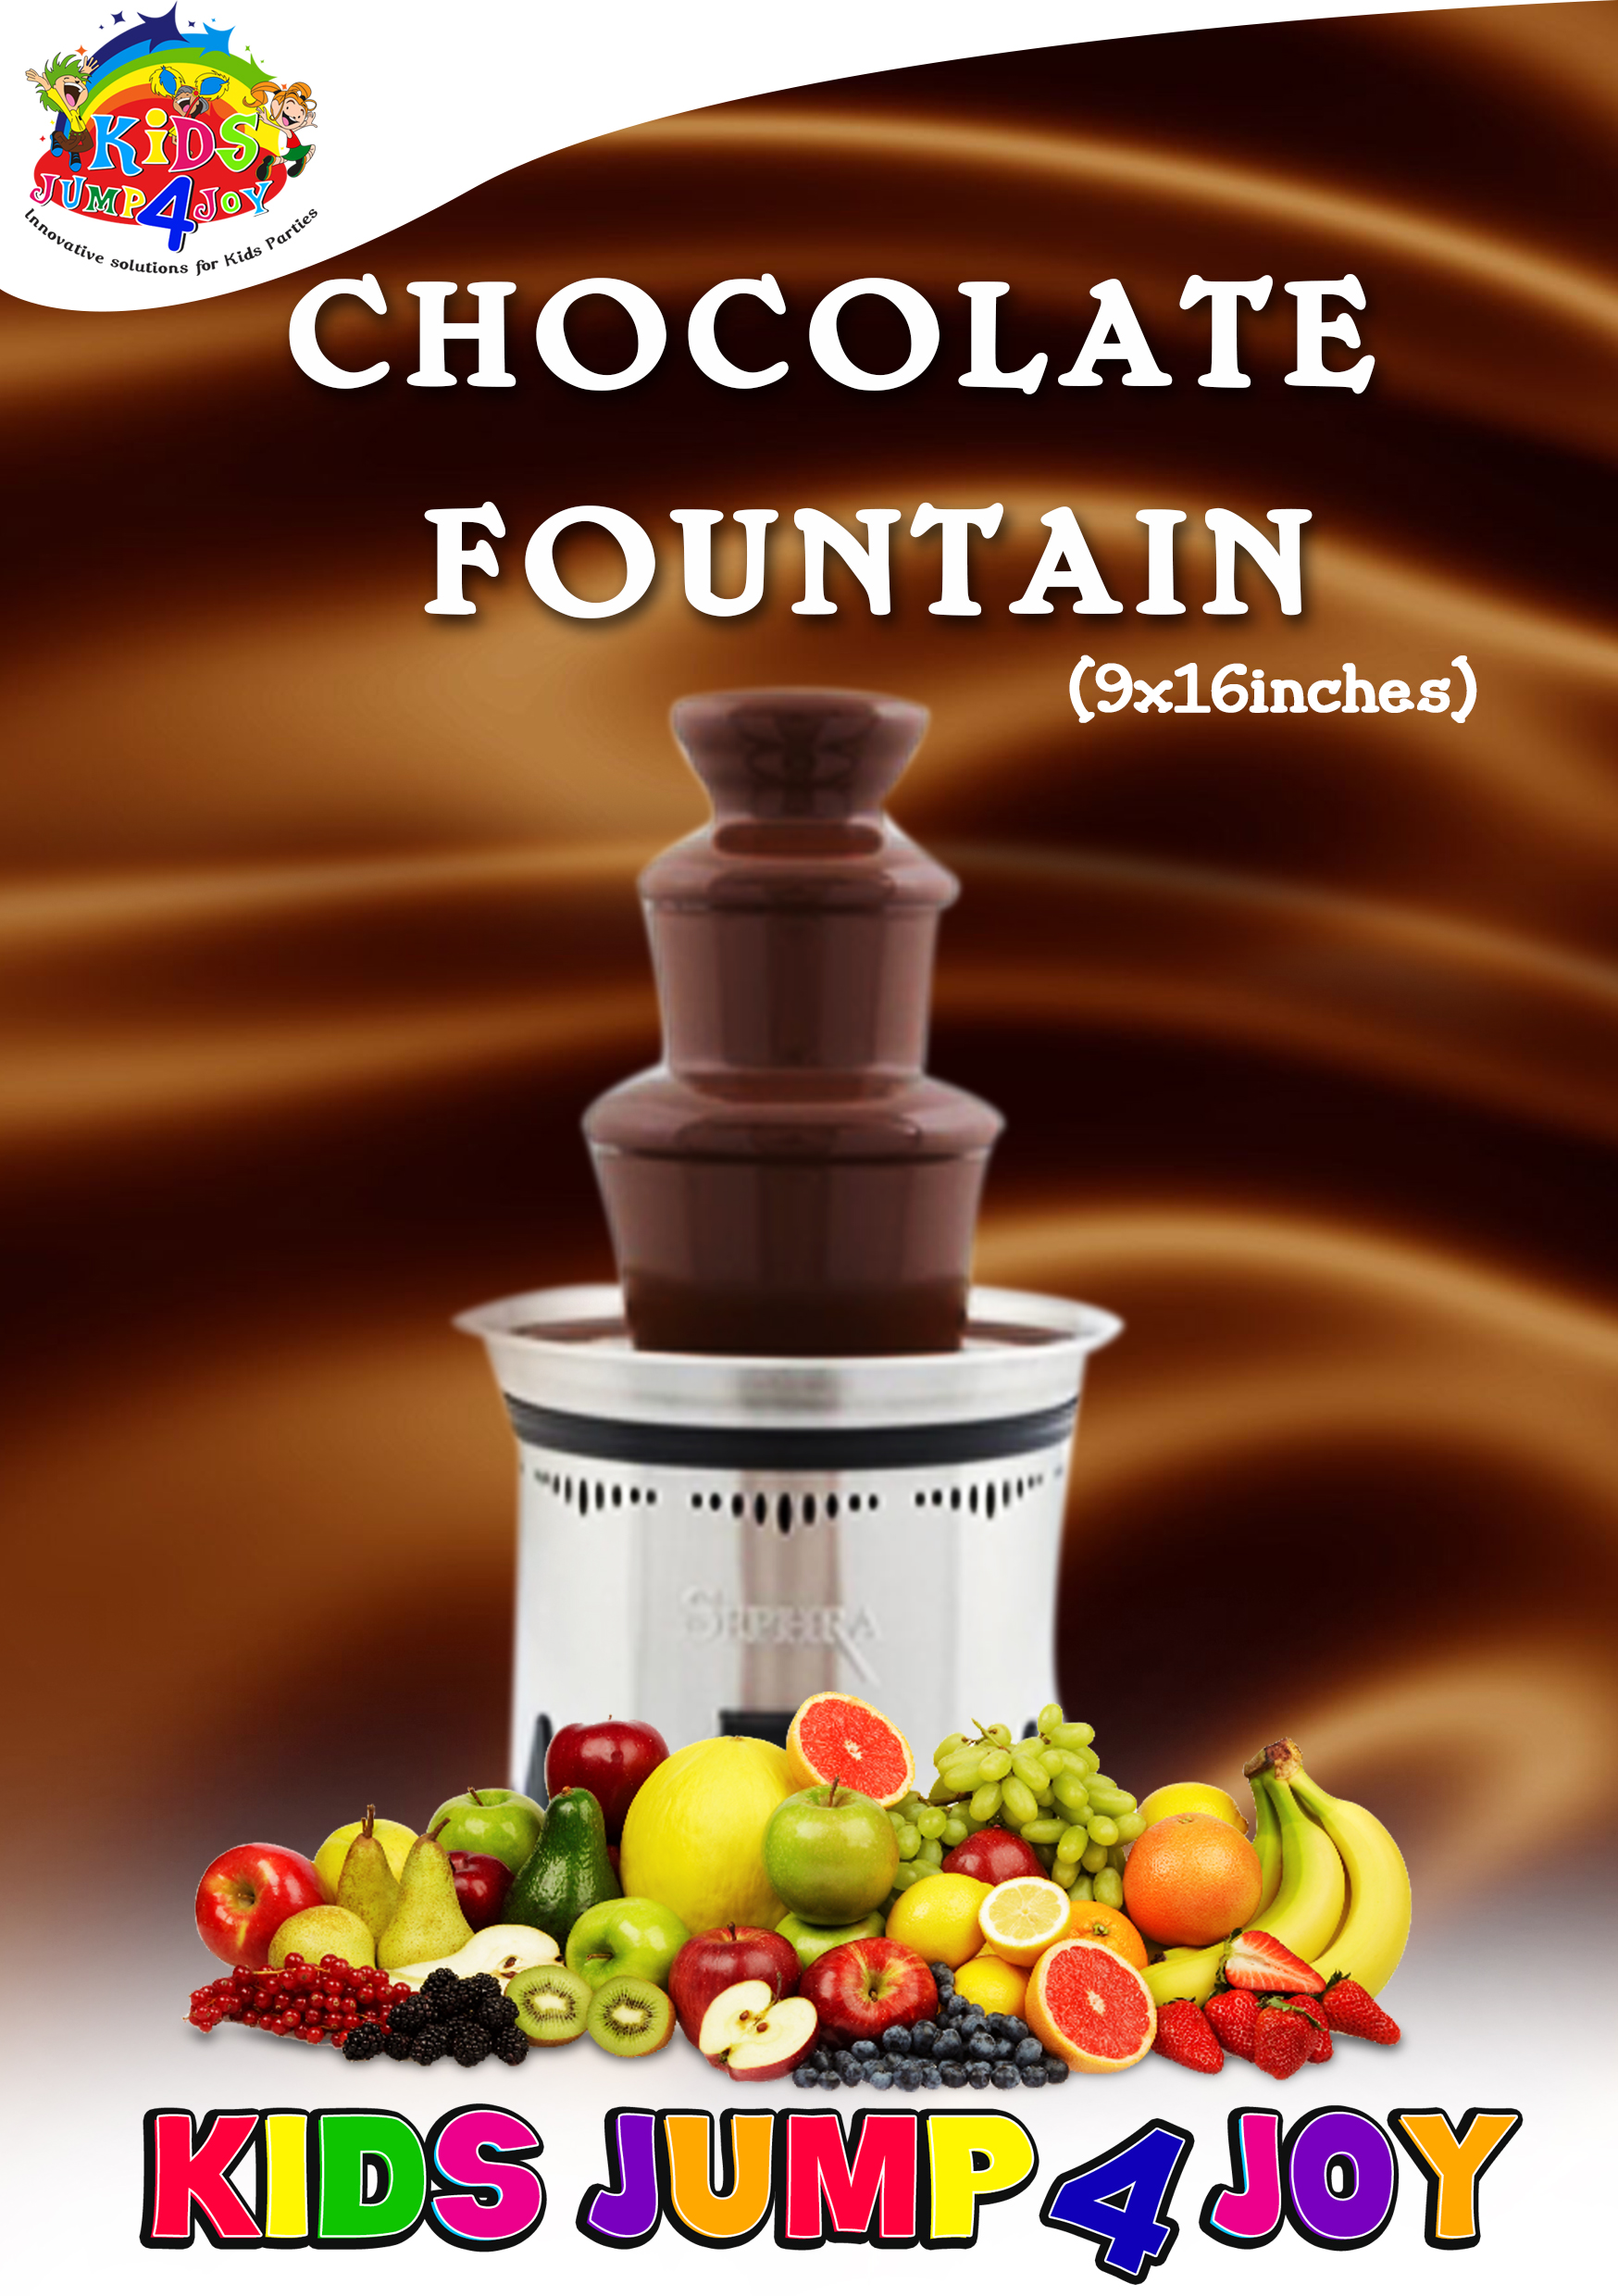 CHOCLATE FOUNTAIN HIRE “Adding a touch of class to your event”